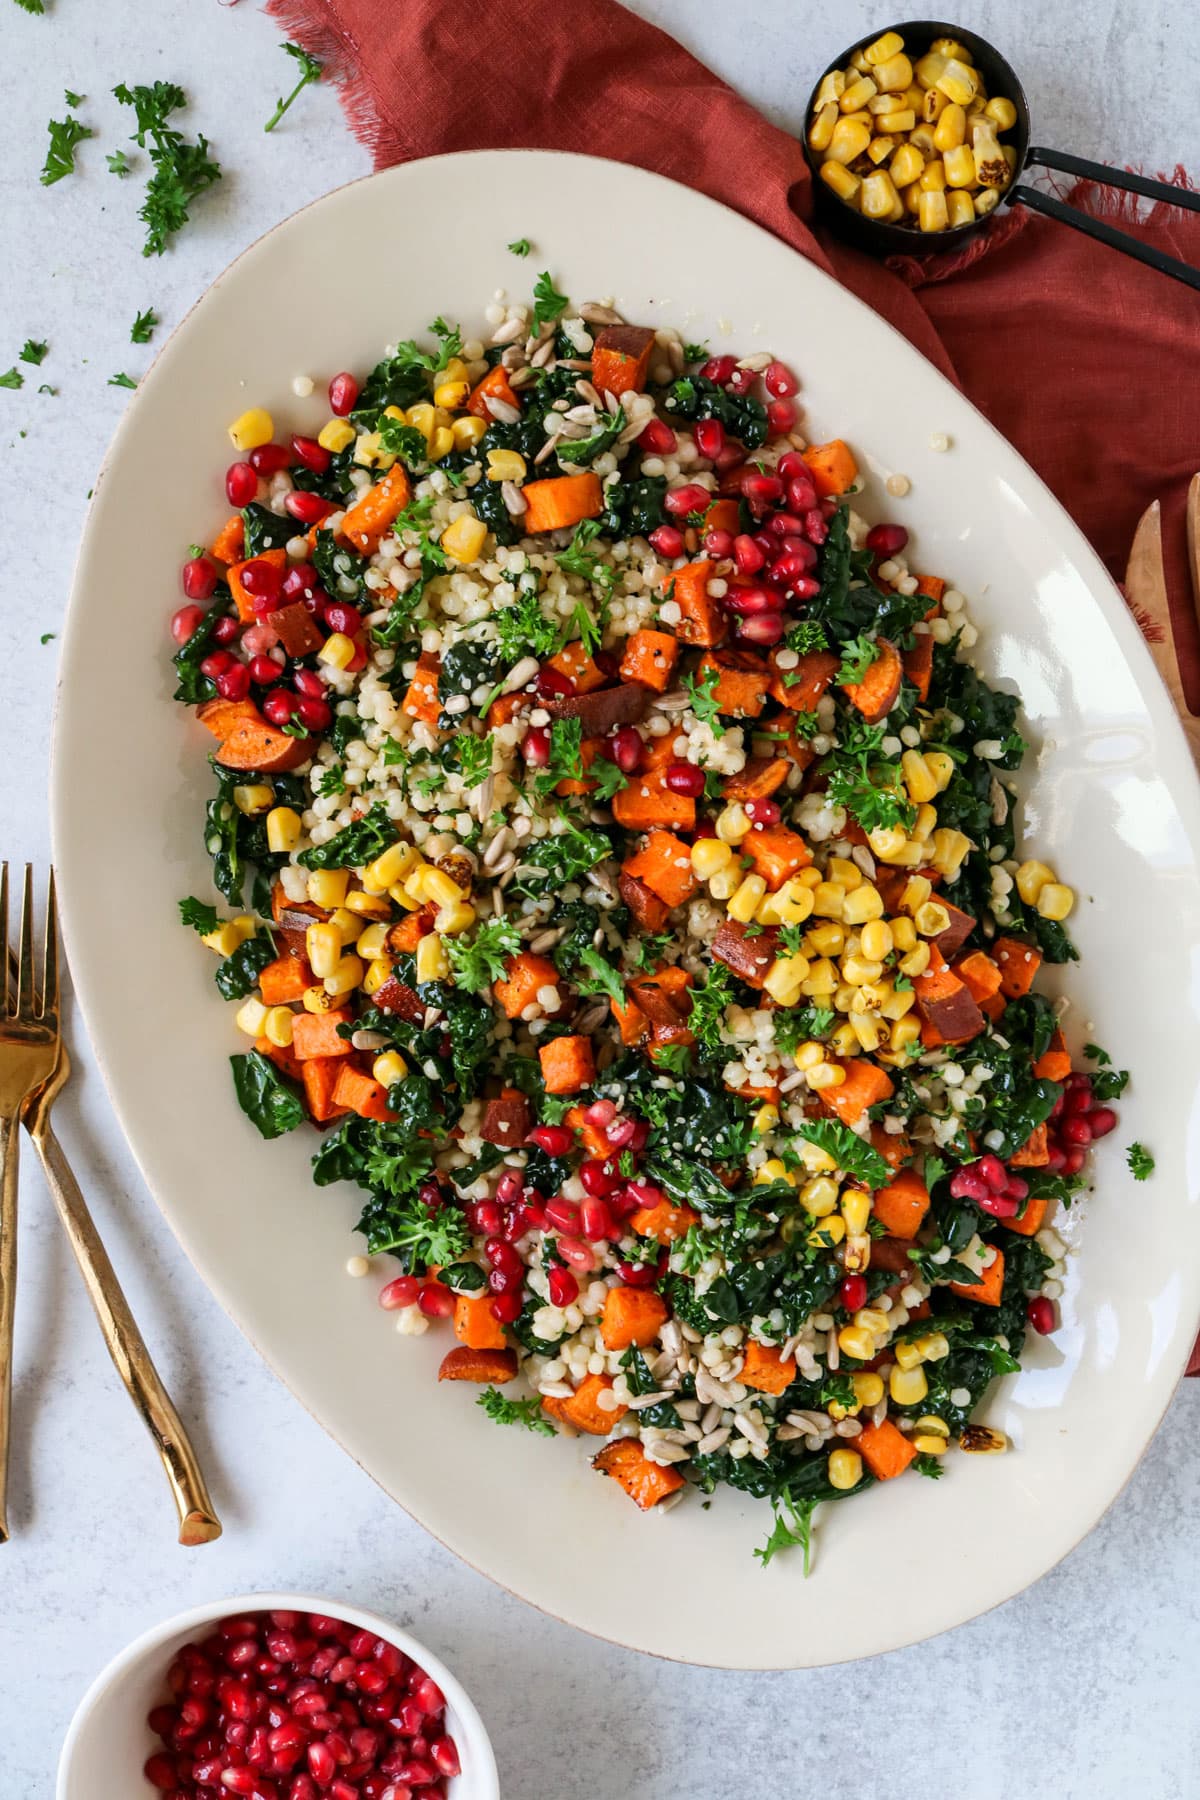 couscous salad with kale, sweet potato and pomegranate